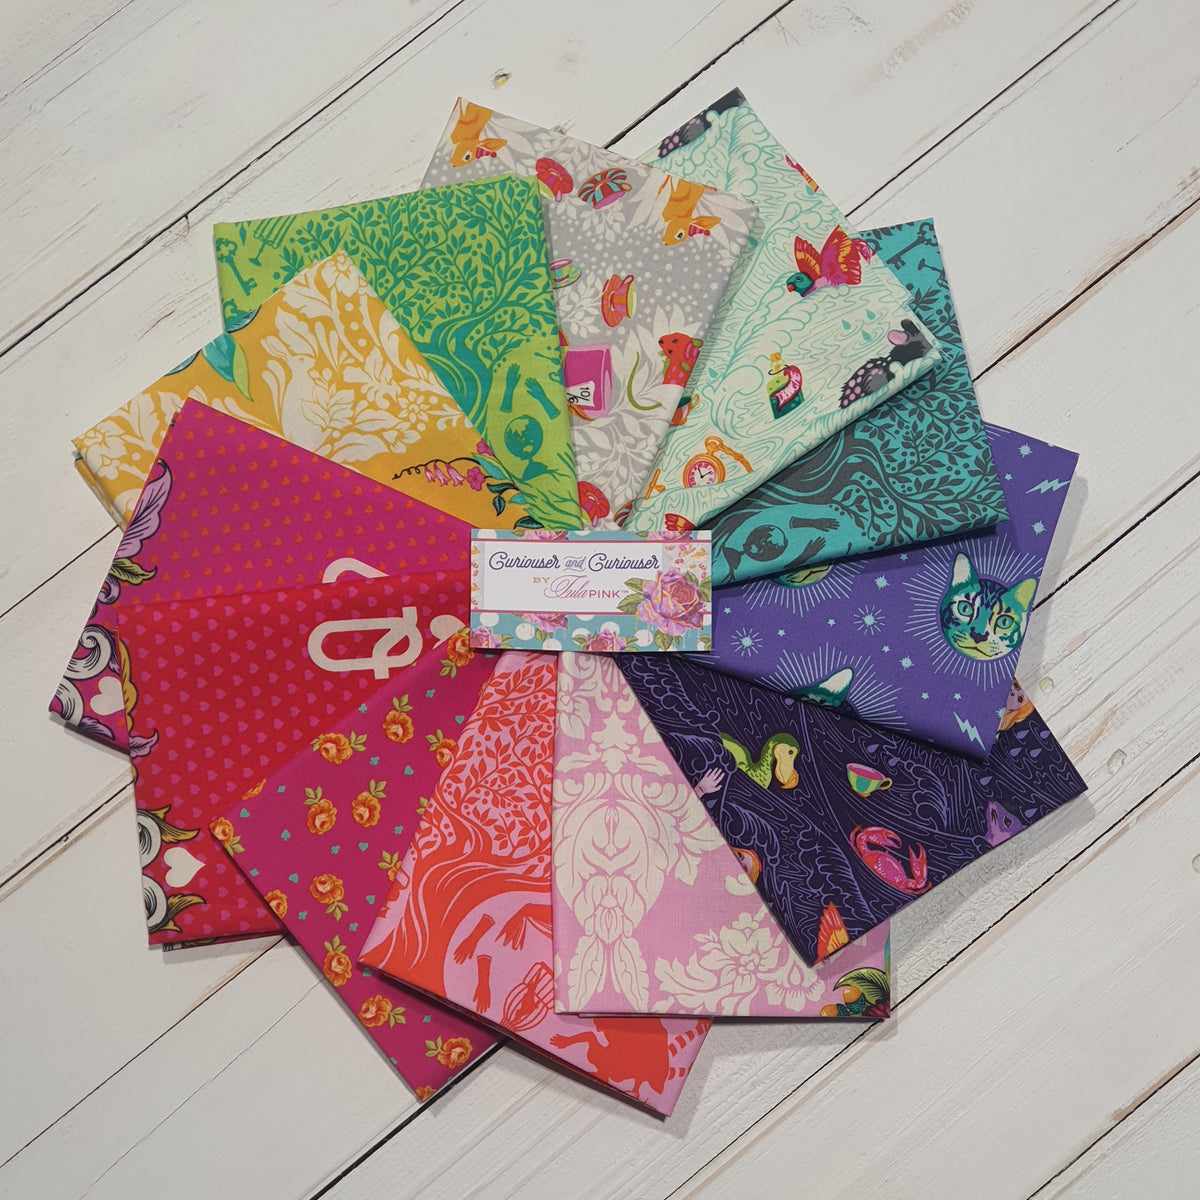 12xFat Quarter Bundle - Curiouser and Curiouser by Tula Pink